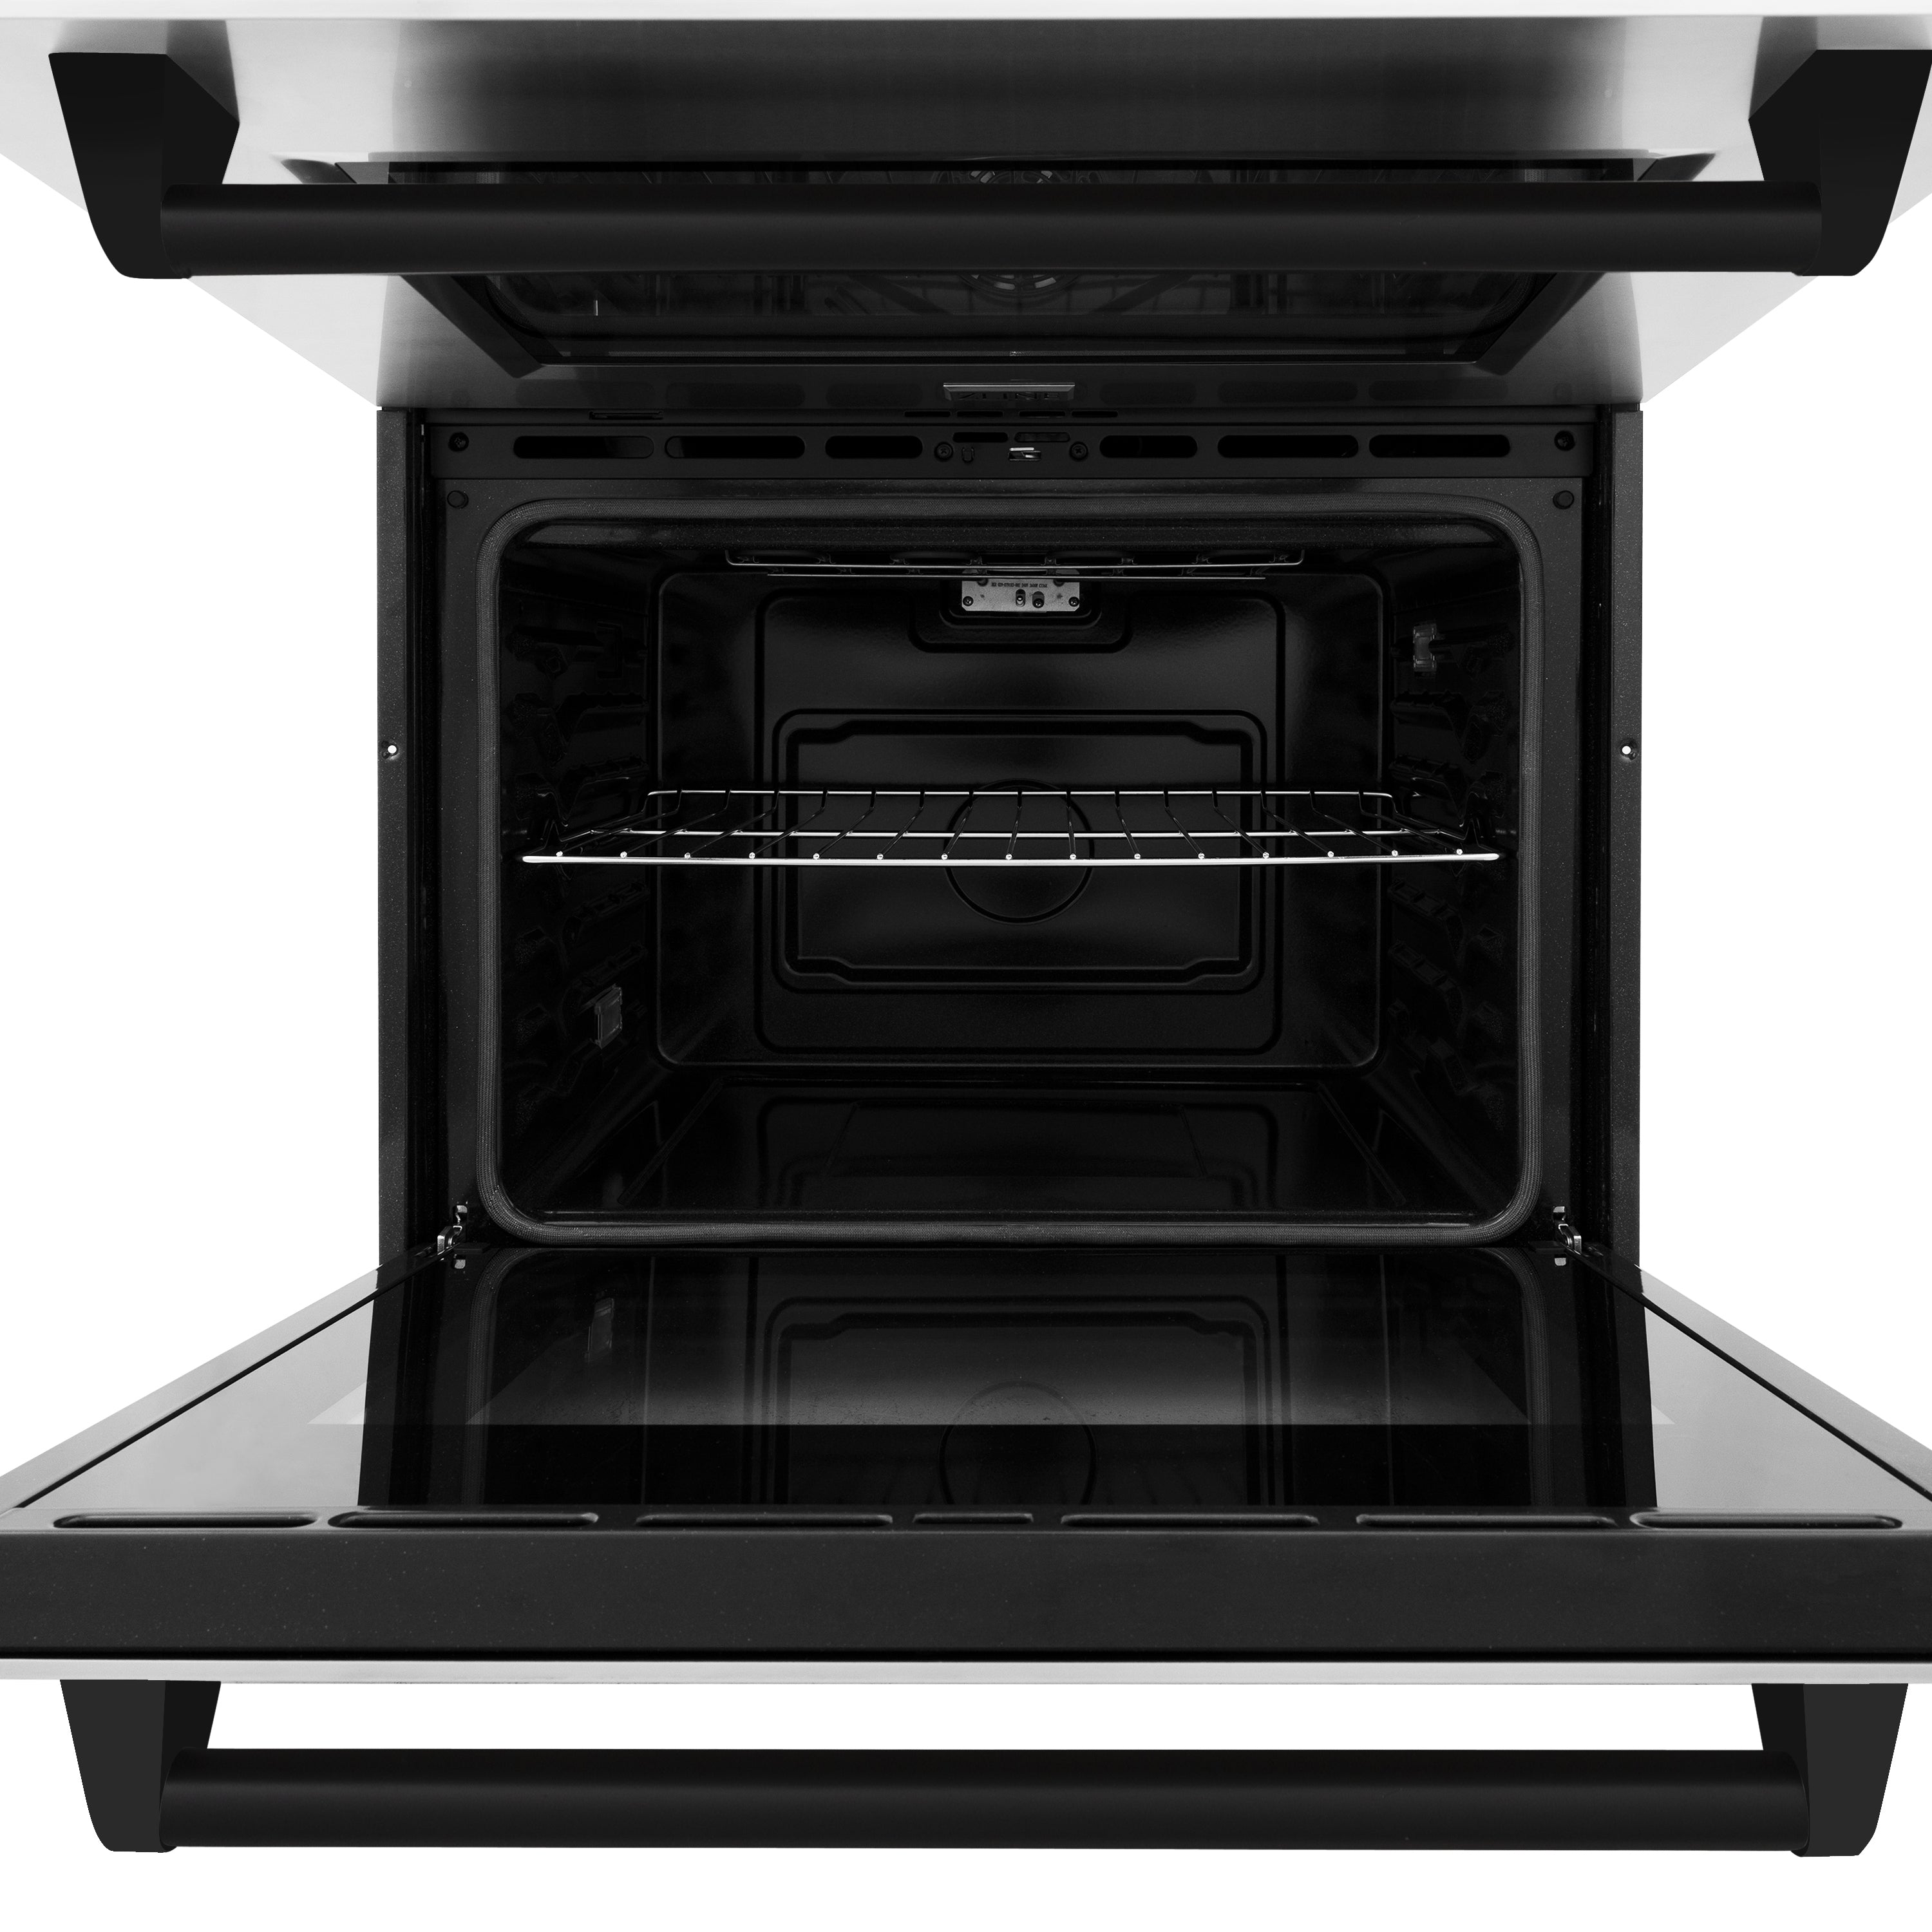 ZLINE 30" Autograph Edition Double Wall Oven with Self Clean and True Convection in Stainless Steel and Matte Black (AWDZ-30-MB)